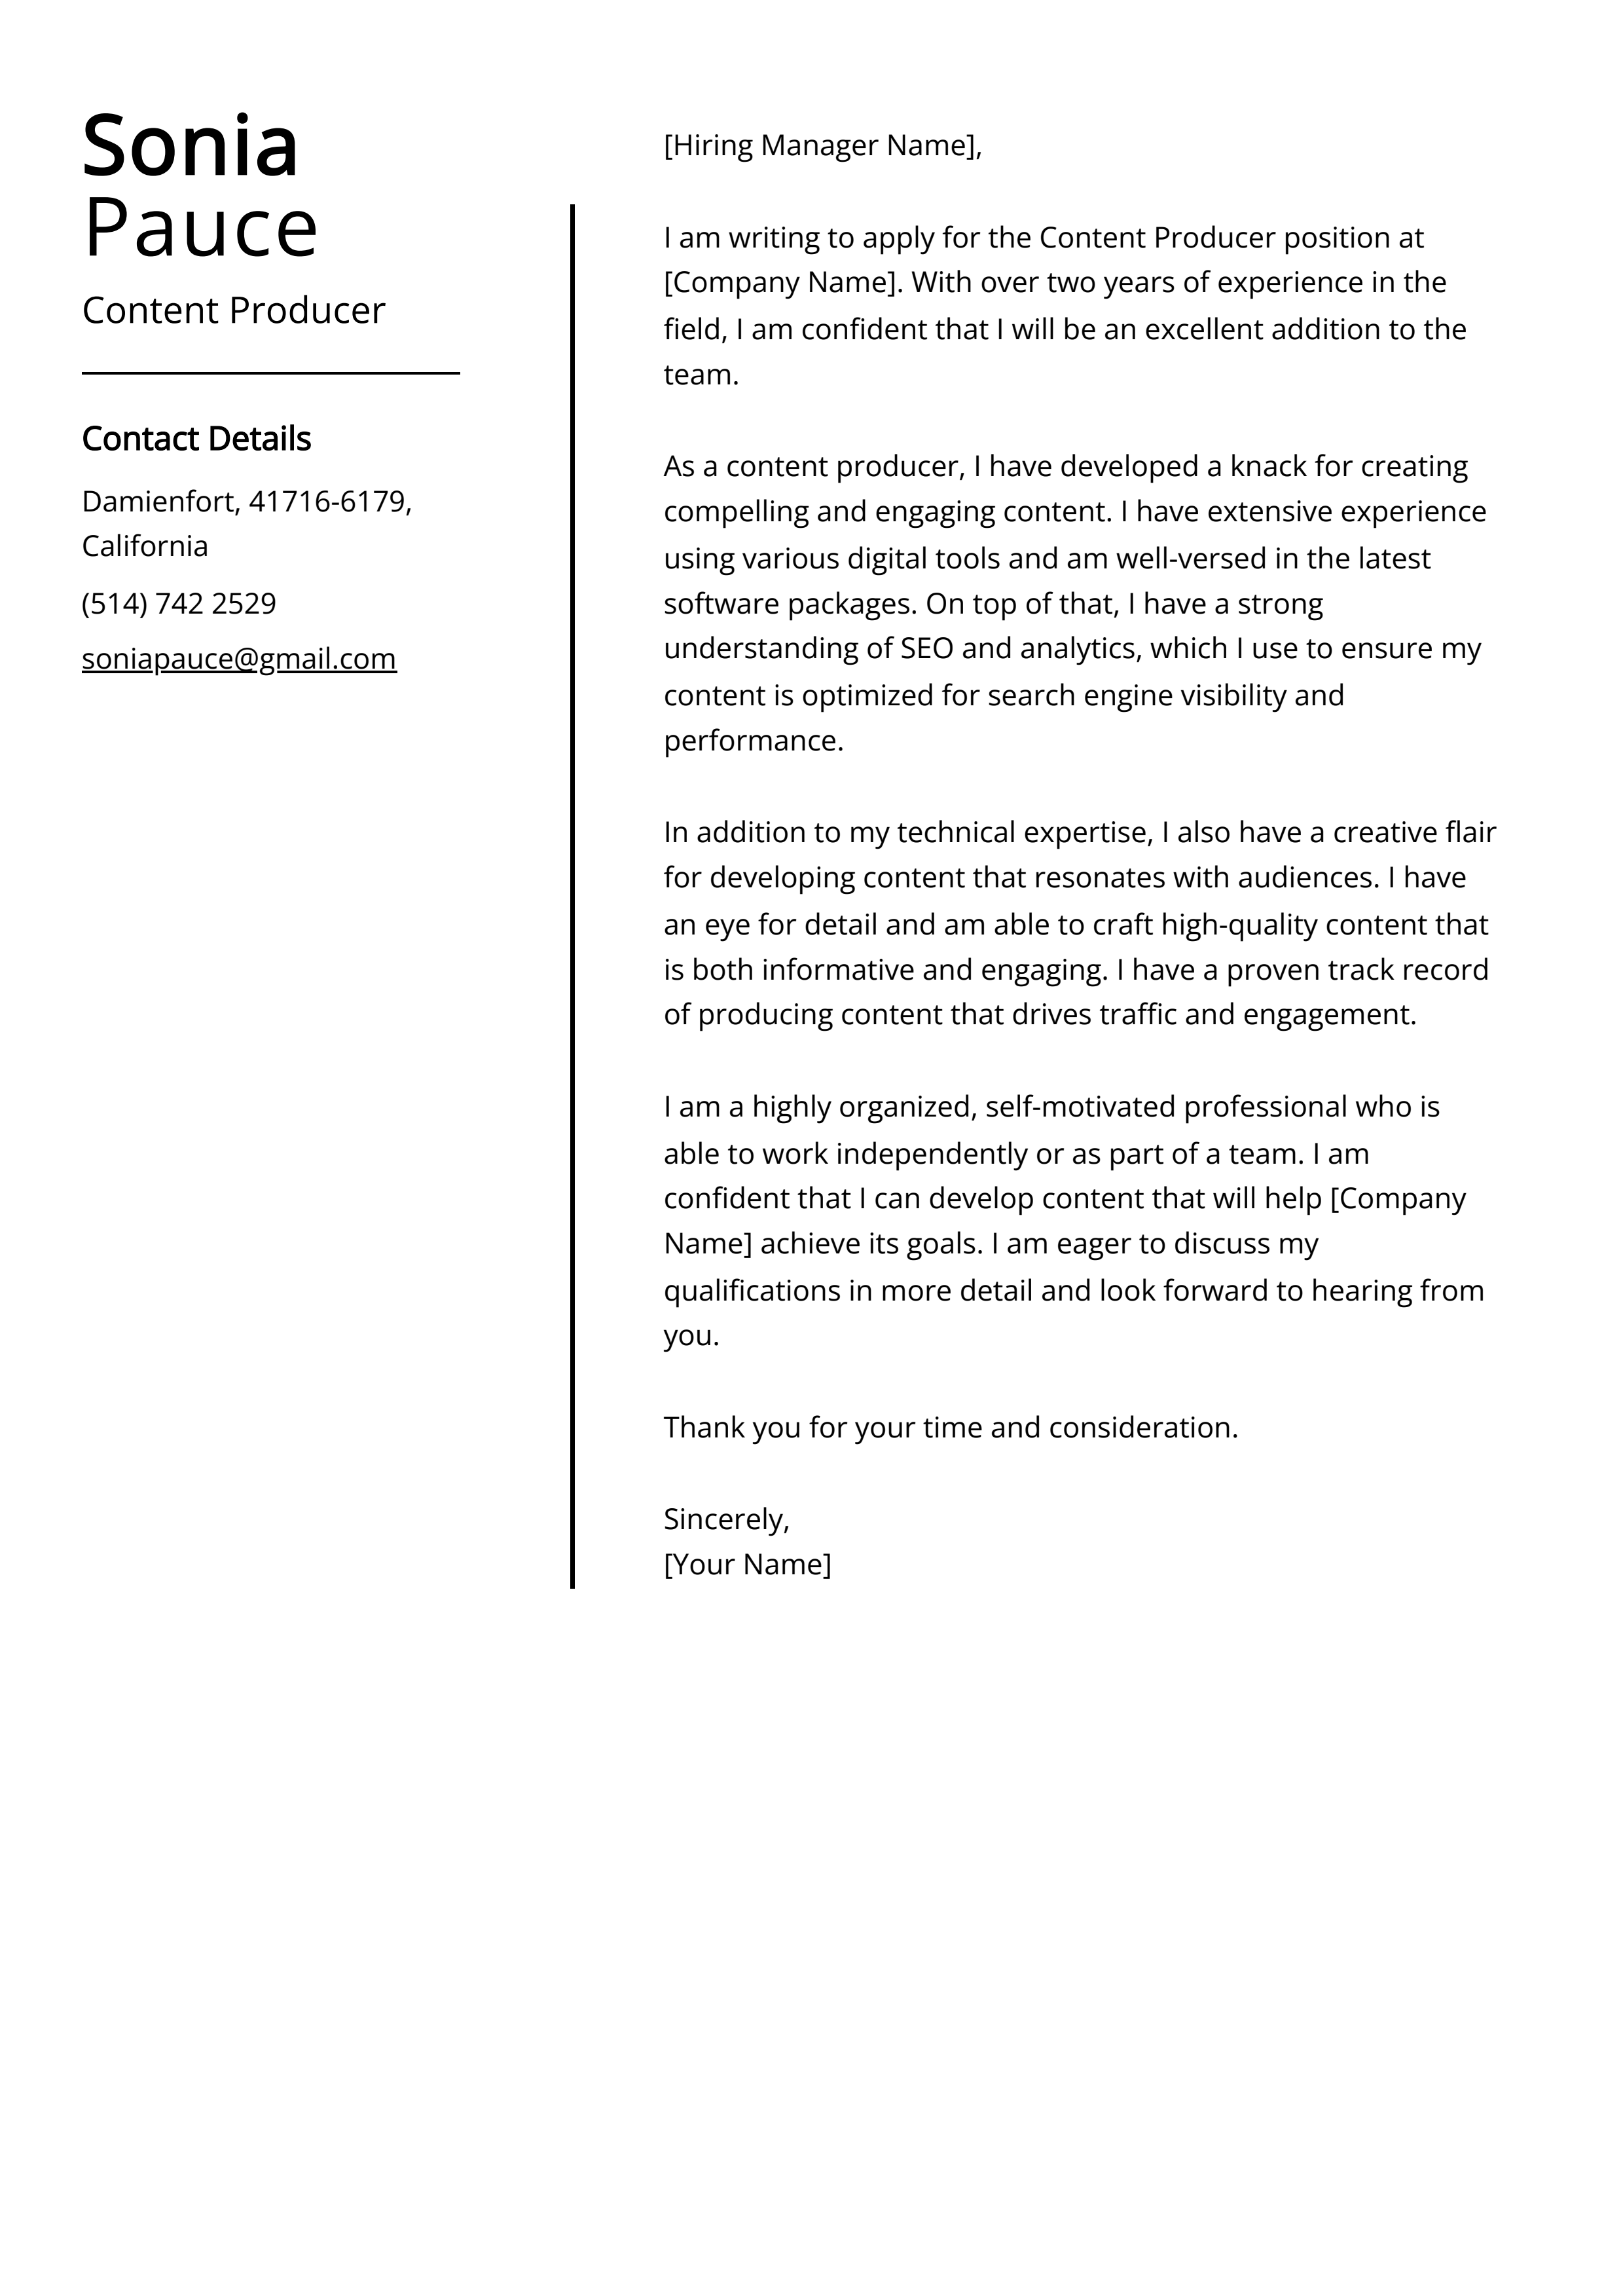 Content Producer Cover Letter Example